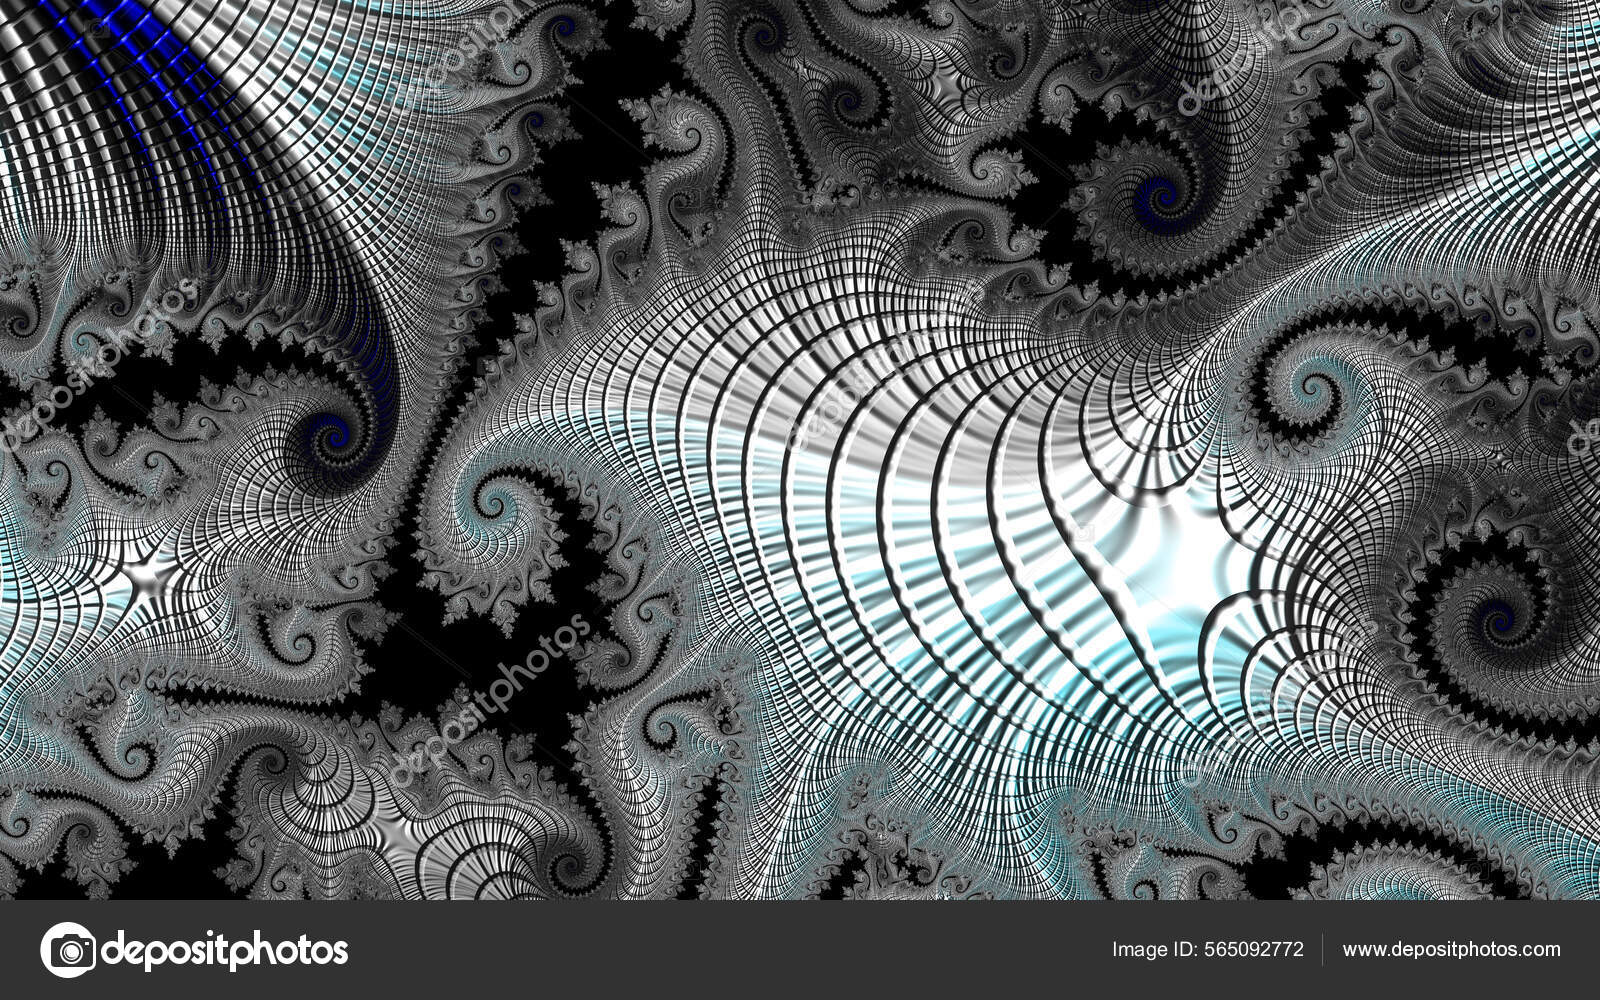 Abstract Computer Generated Fractal Design. A Fractal Is A Never